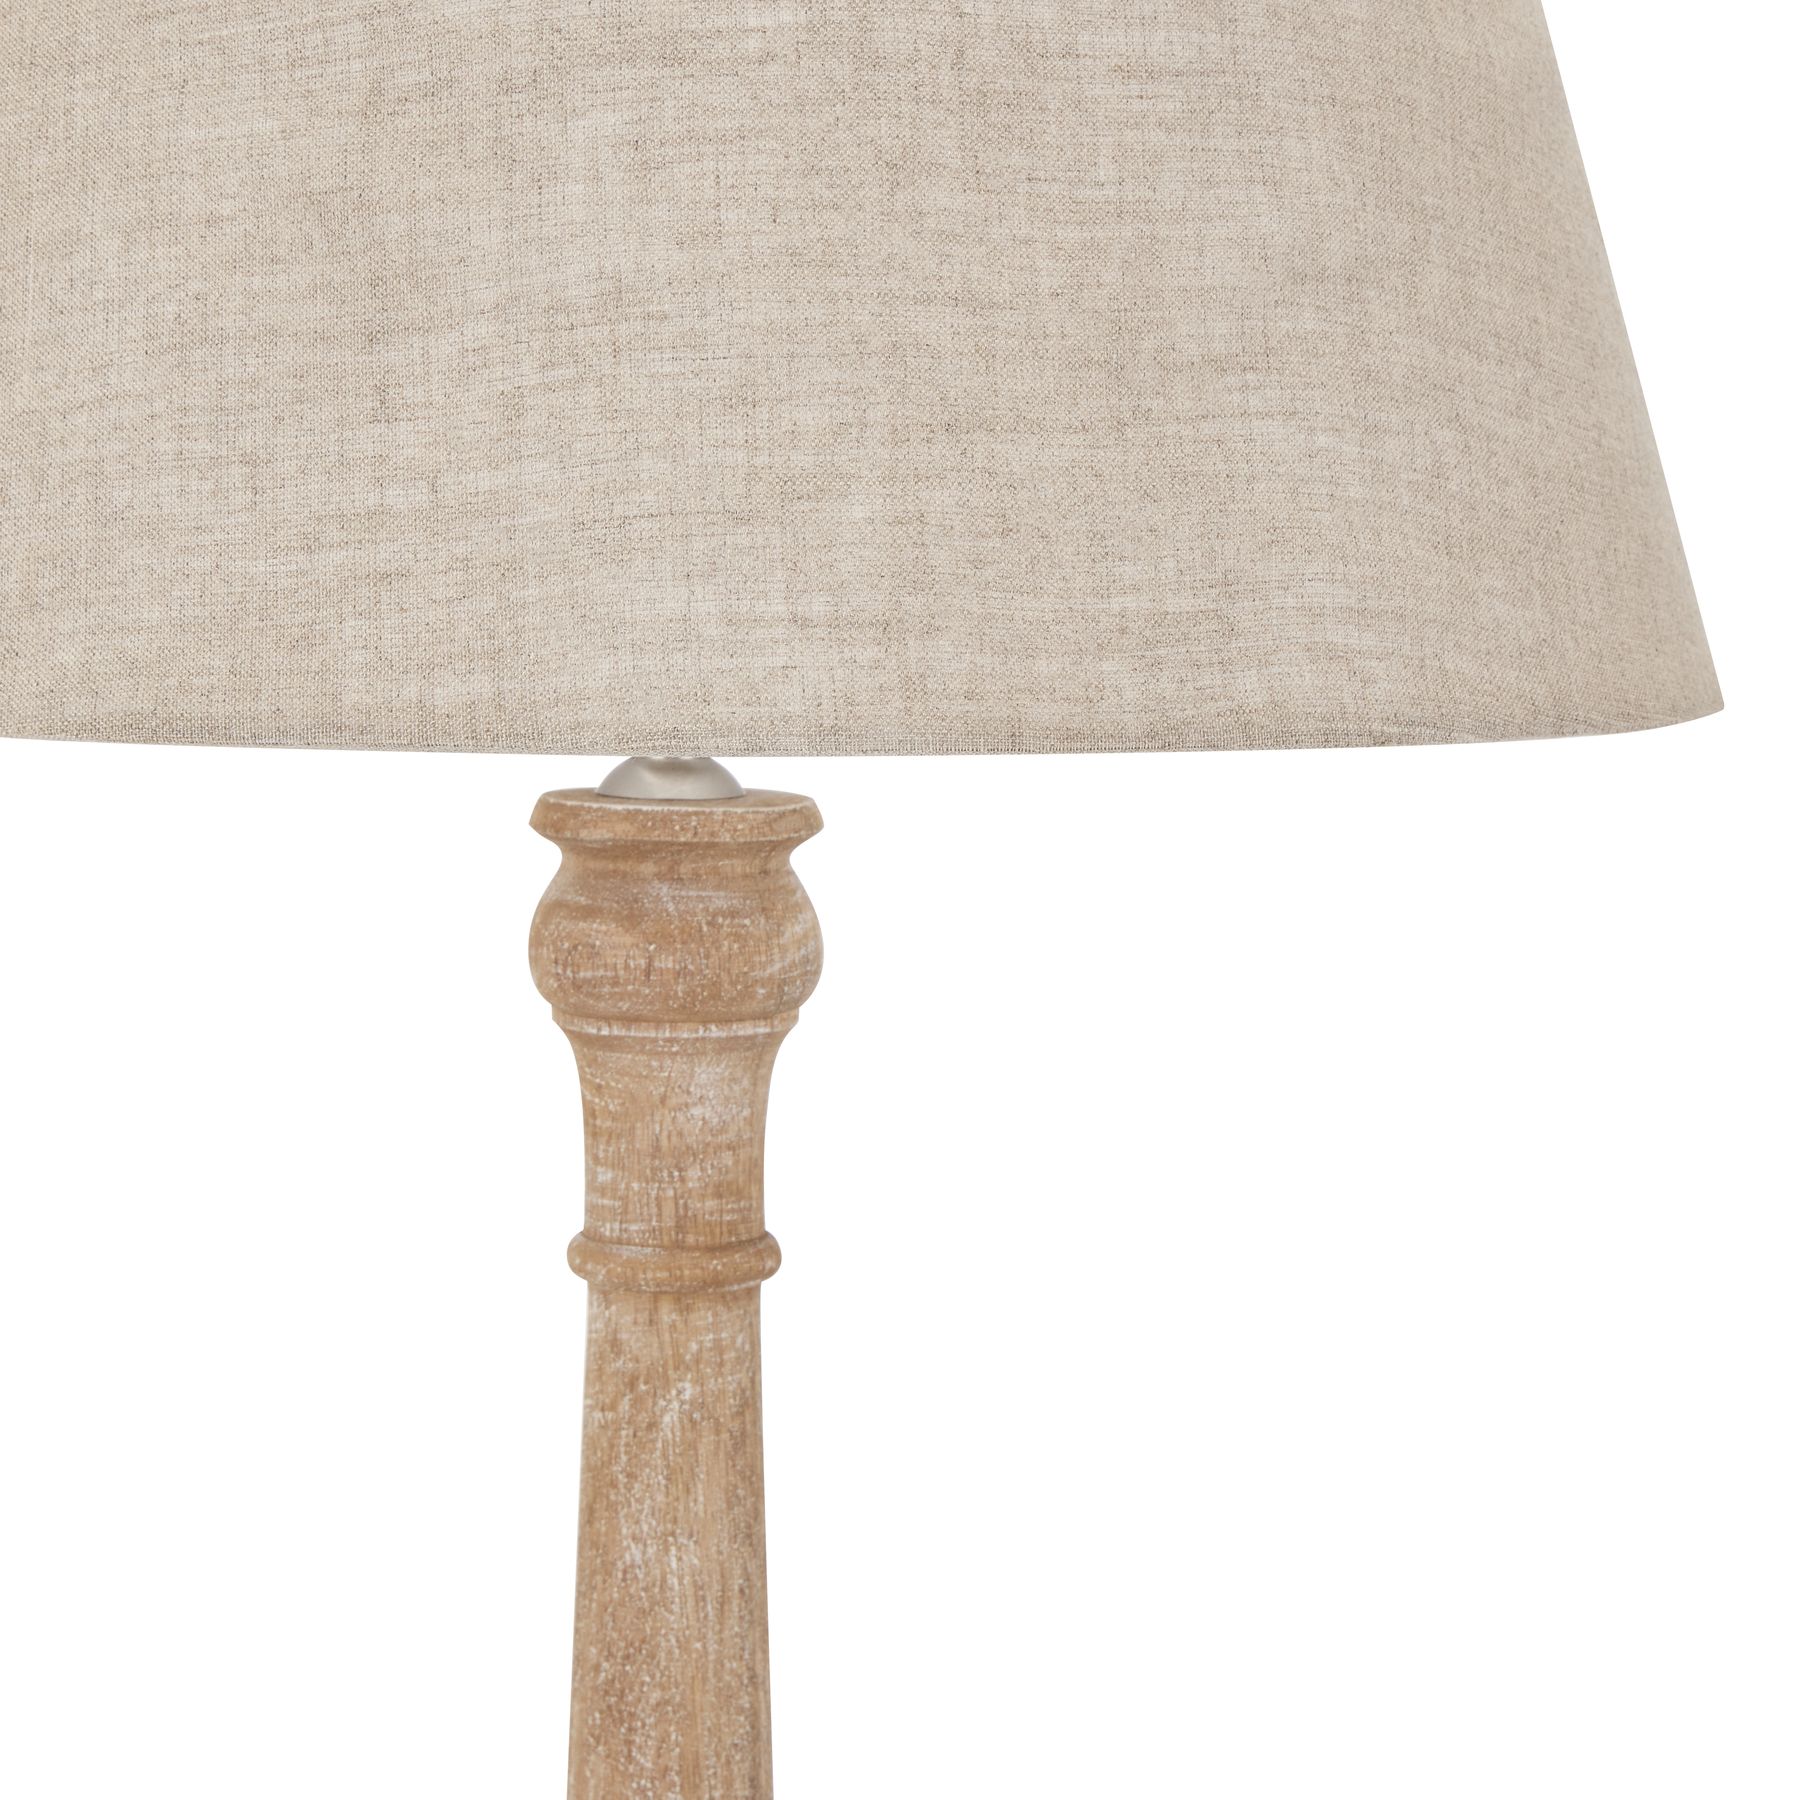 Delaney Natural Wash Spindle Lamp With Linen Shade - Image 2